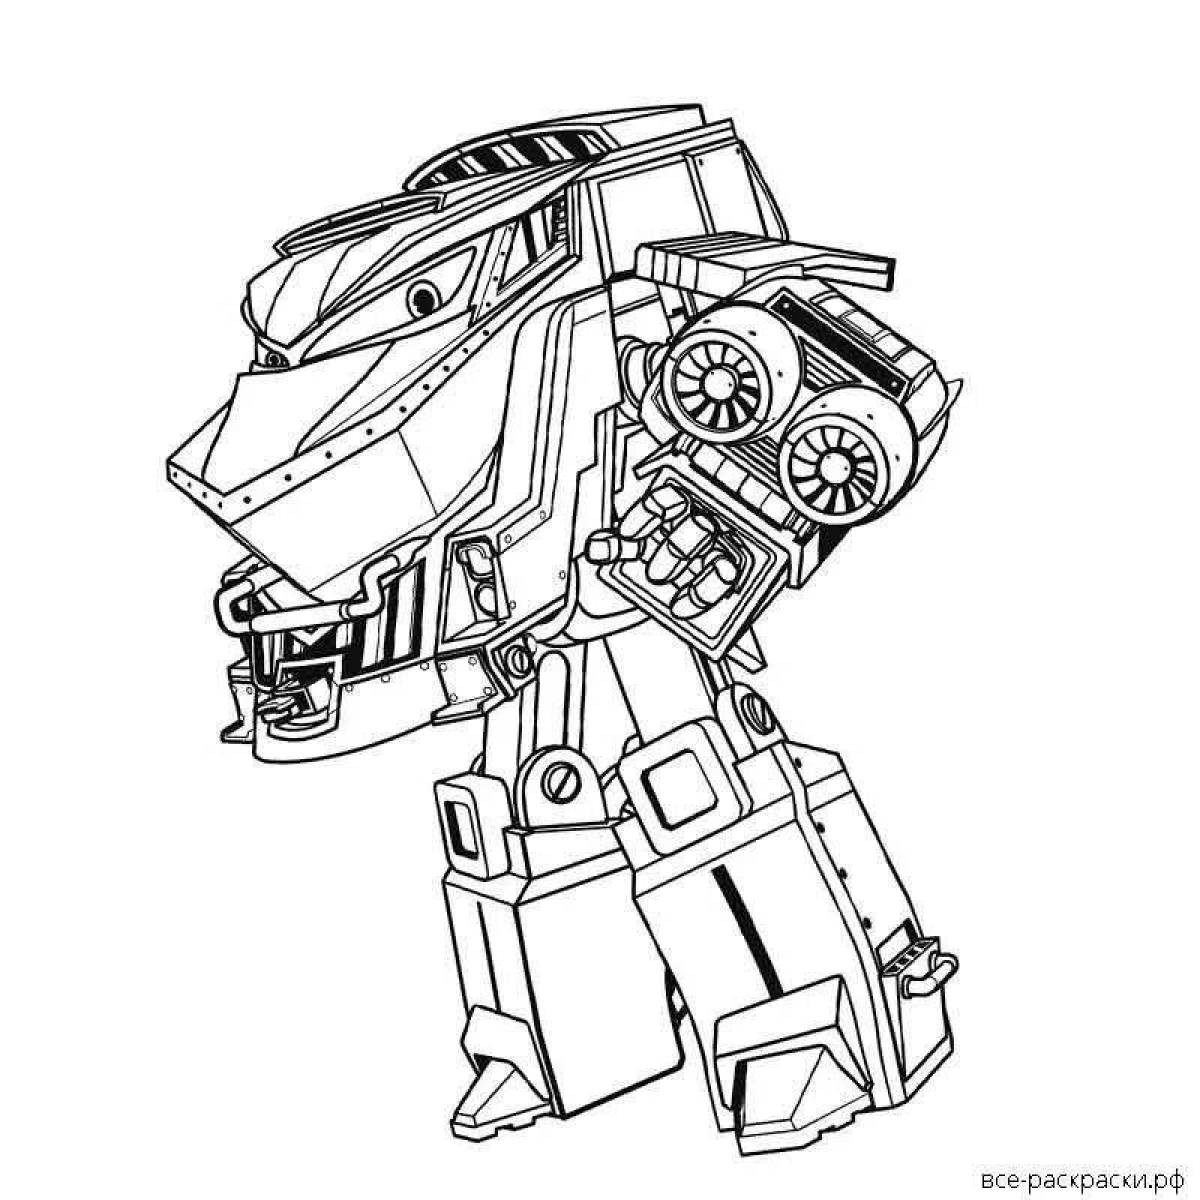 Colorful kay train robot coloring page